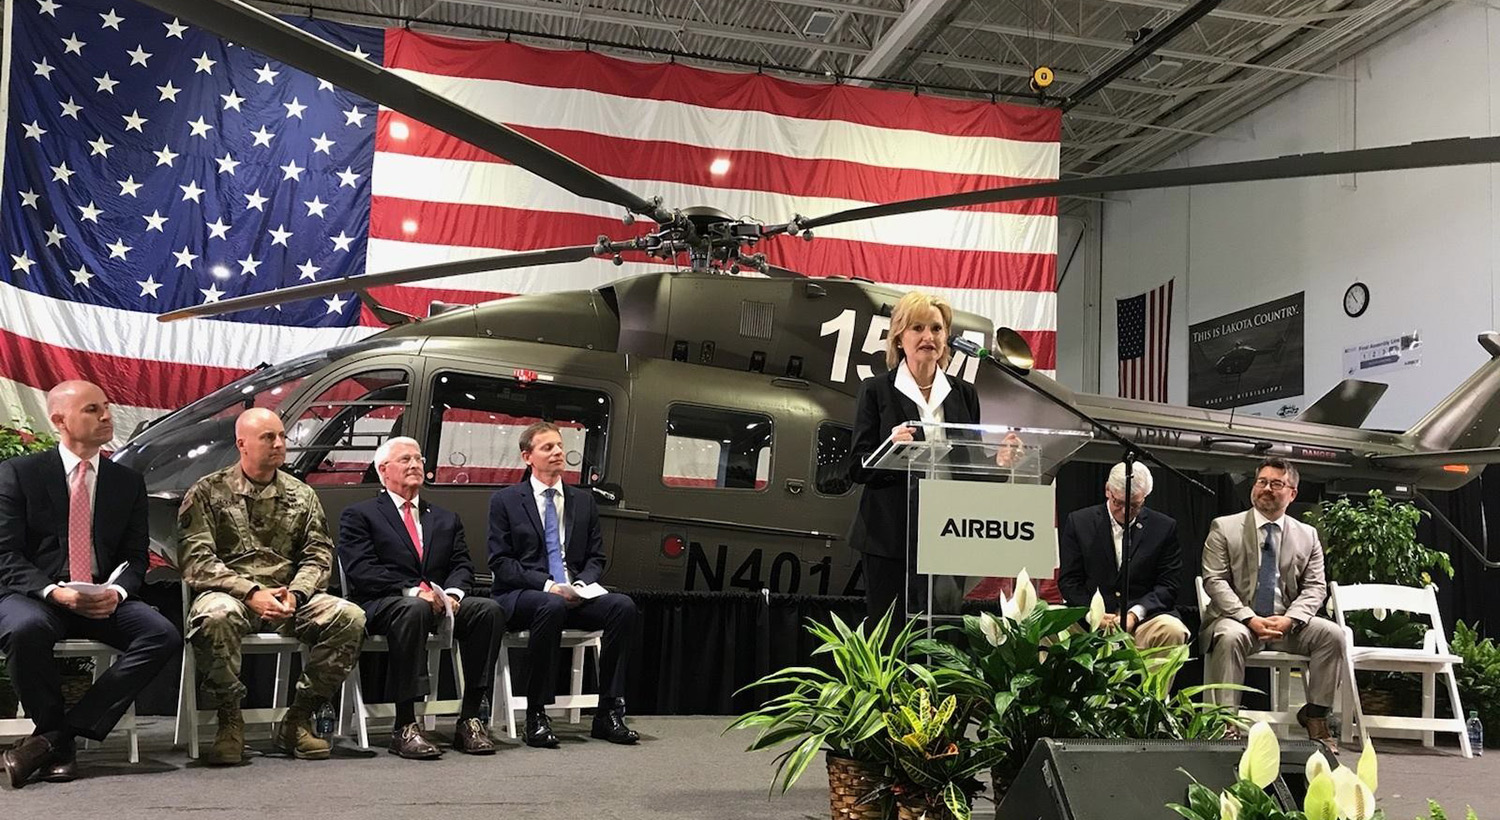 Senator Hyde-Smith addresses the crowd at the Airbus manufacturing plant in Columbus